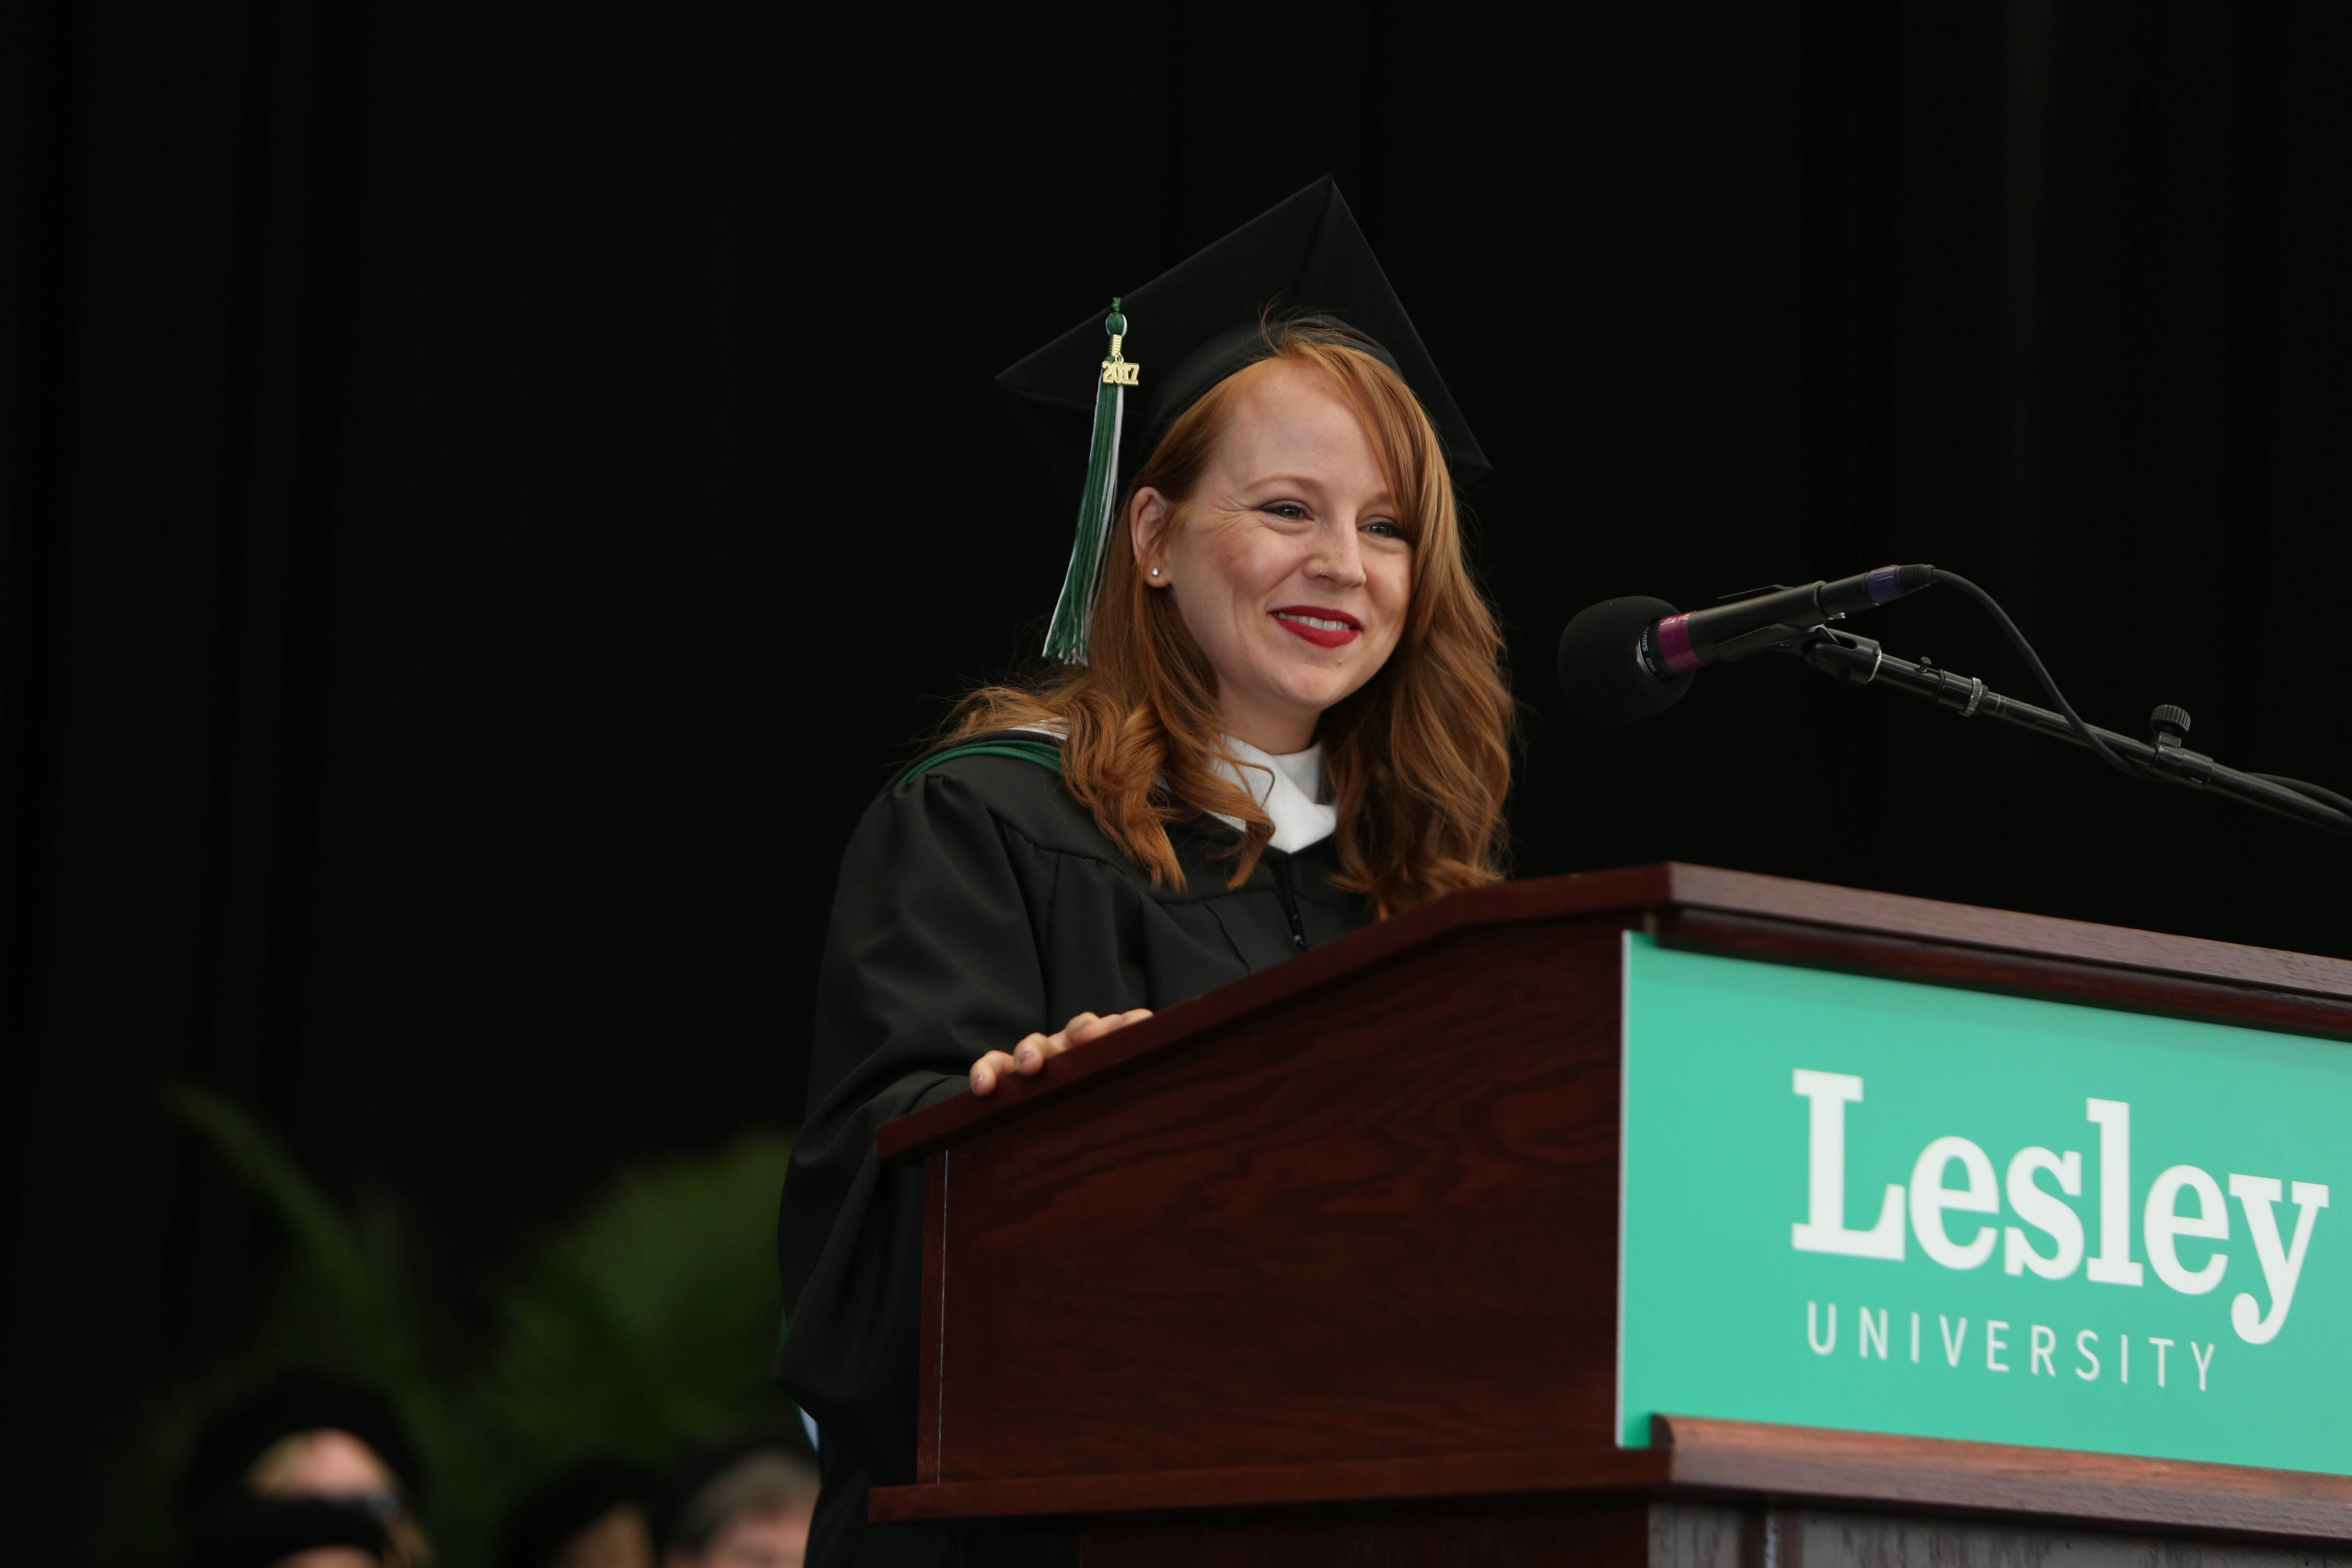 Student speaker Megan Shaffer urged her peers to find the “balance between planning and letting go.”